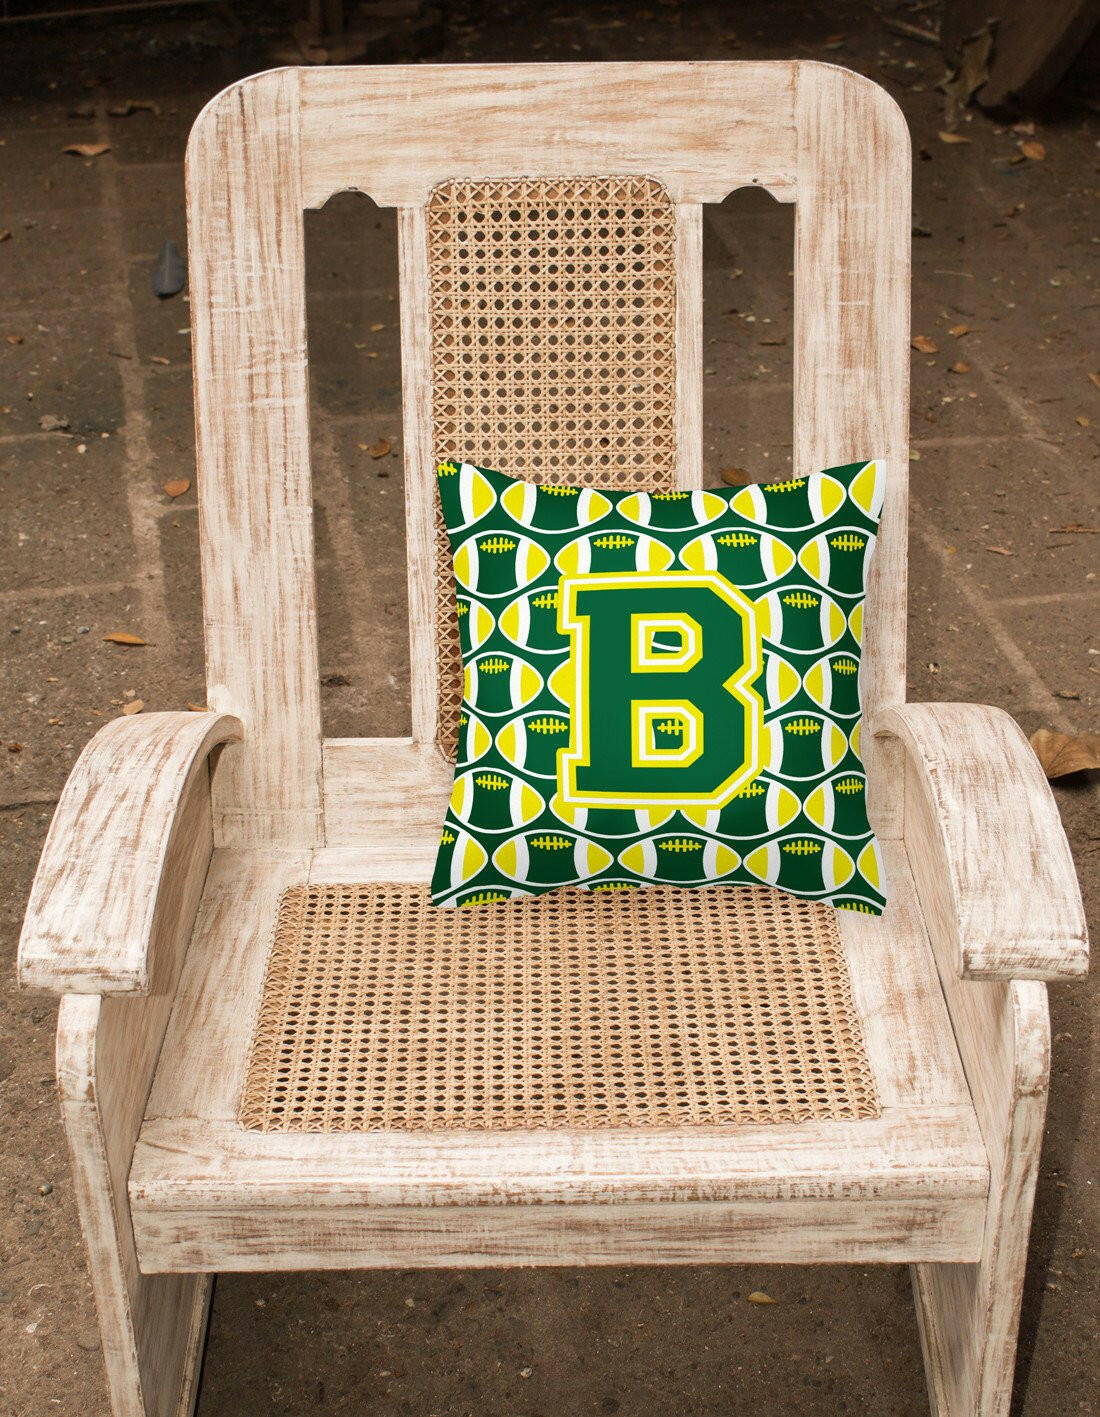 Letter B Football Green and Yellow Fabric Decorative Pillow CJ1075-BPW1414 by Caroline's Treasures